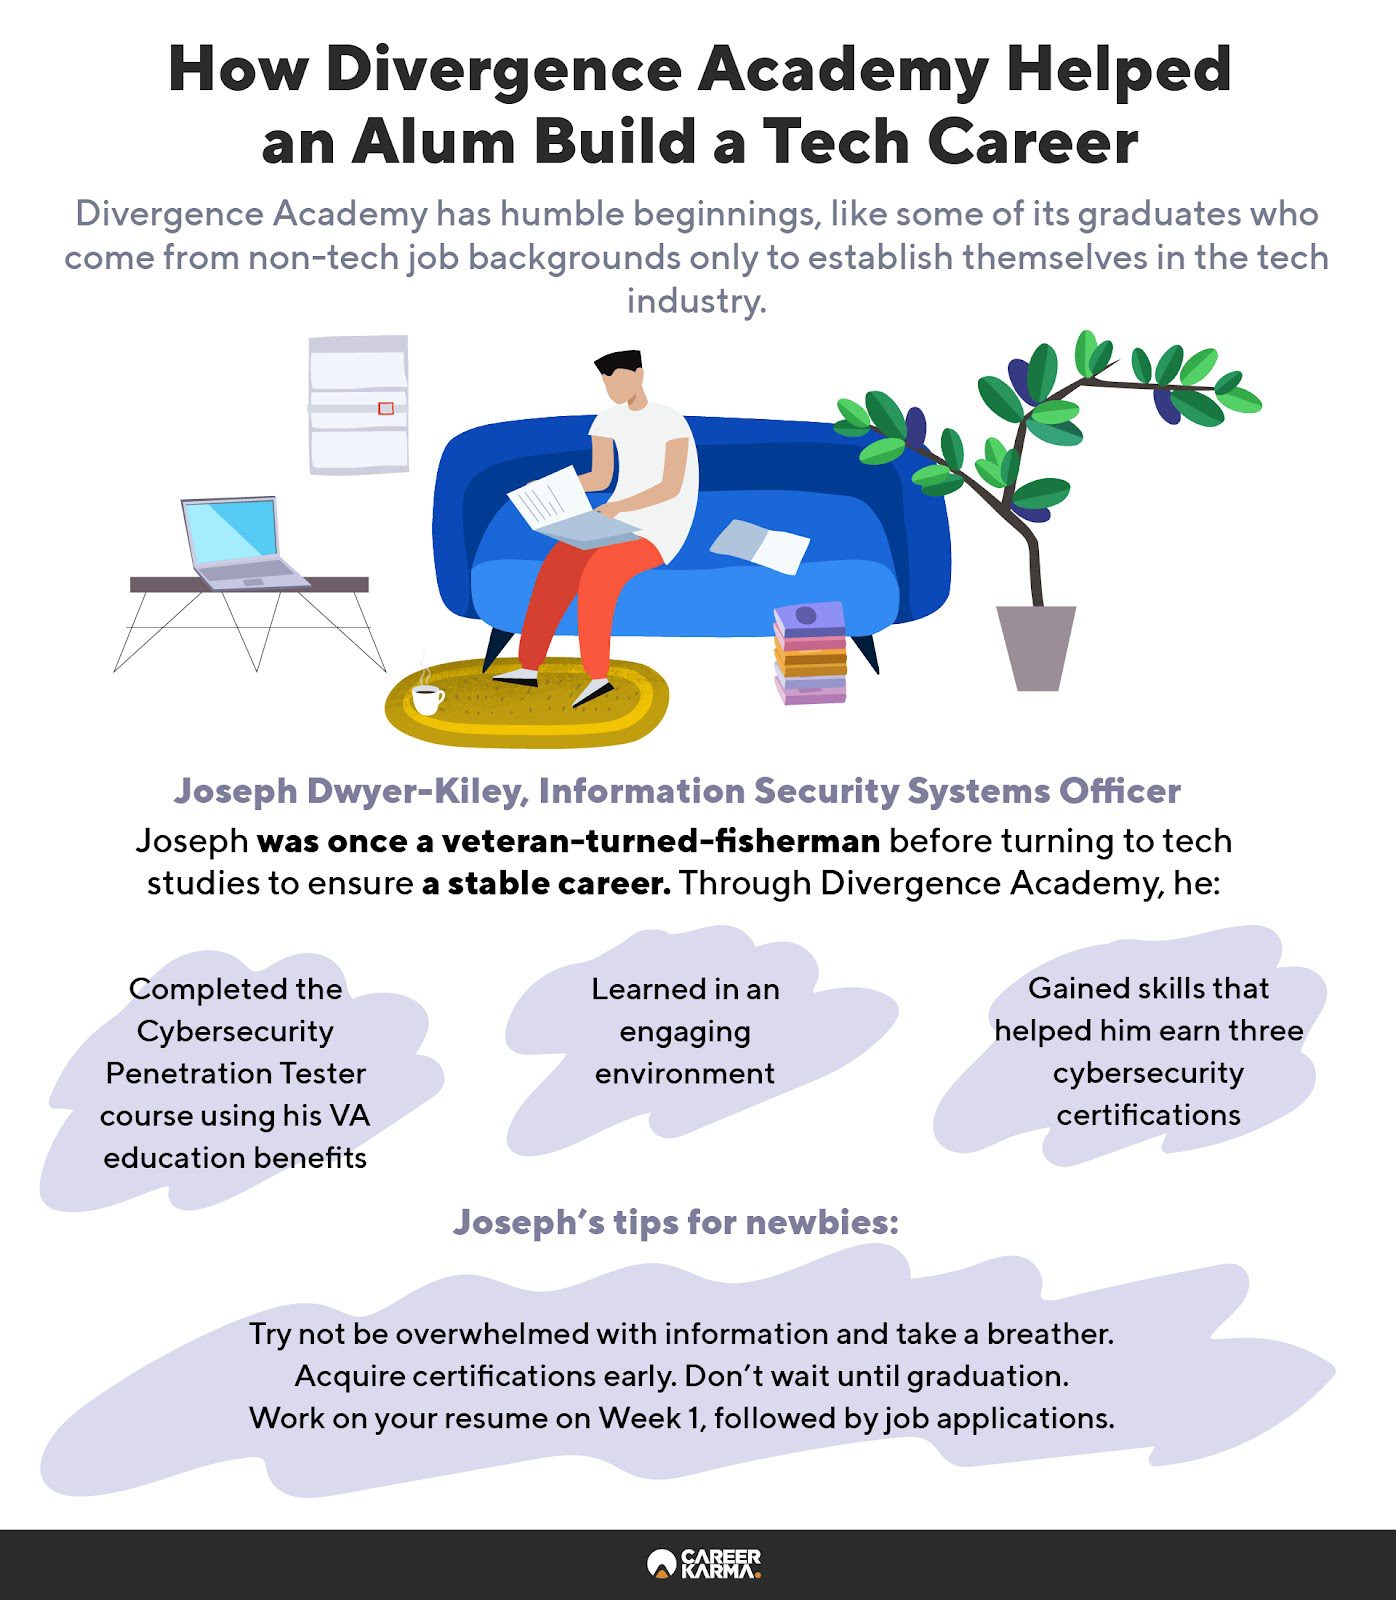 An infographic featuring an alum’s learning experience at Divergence Academy 